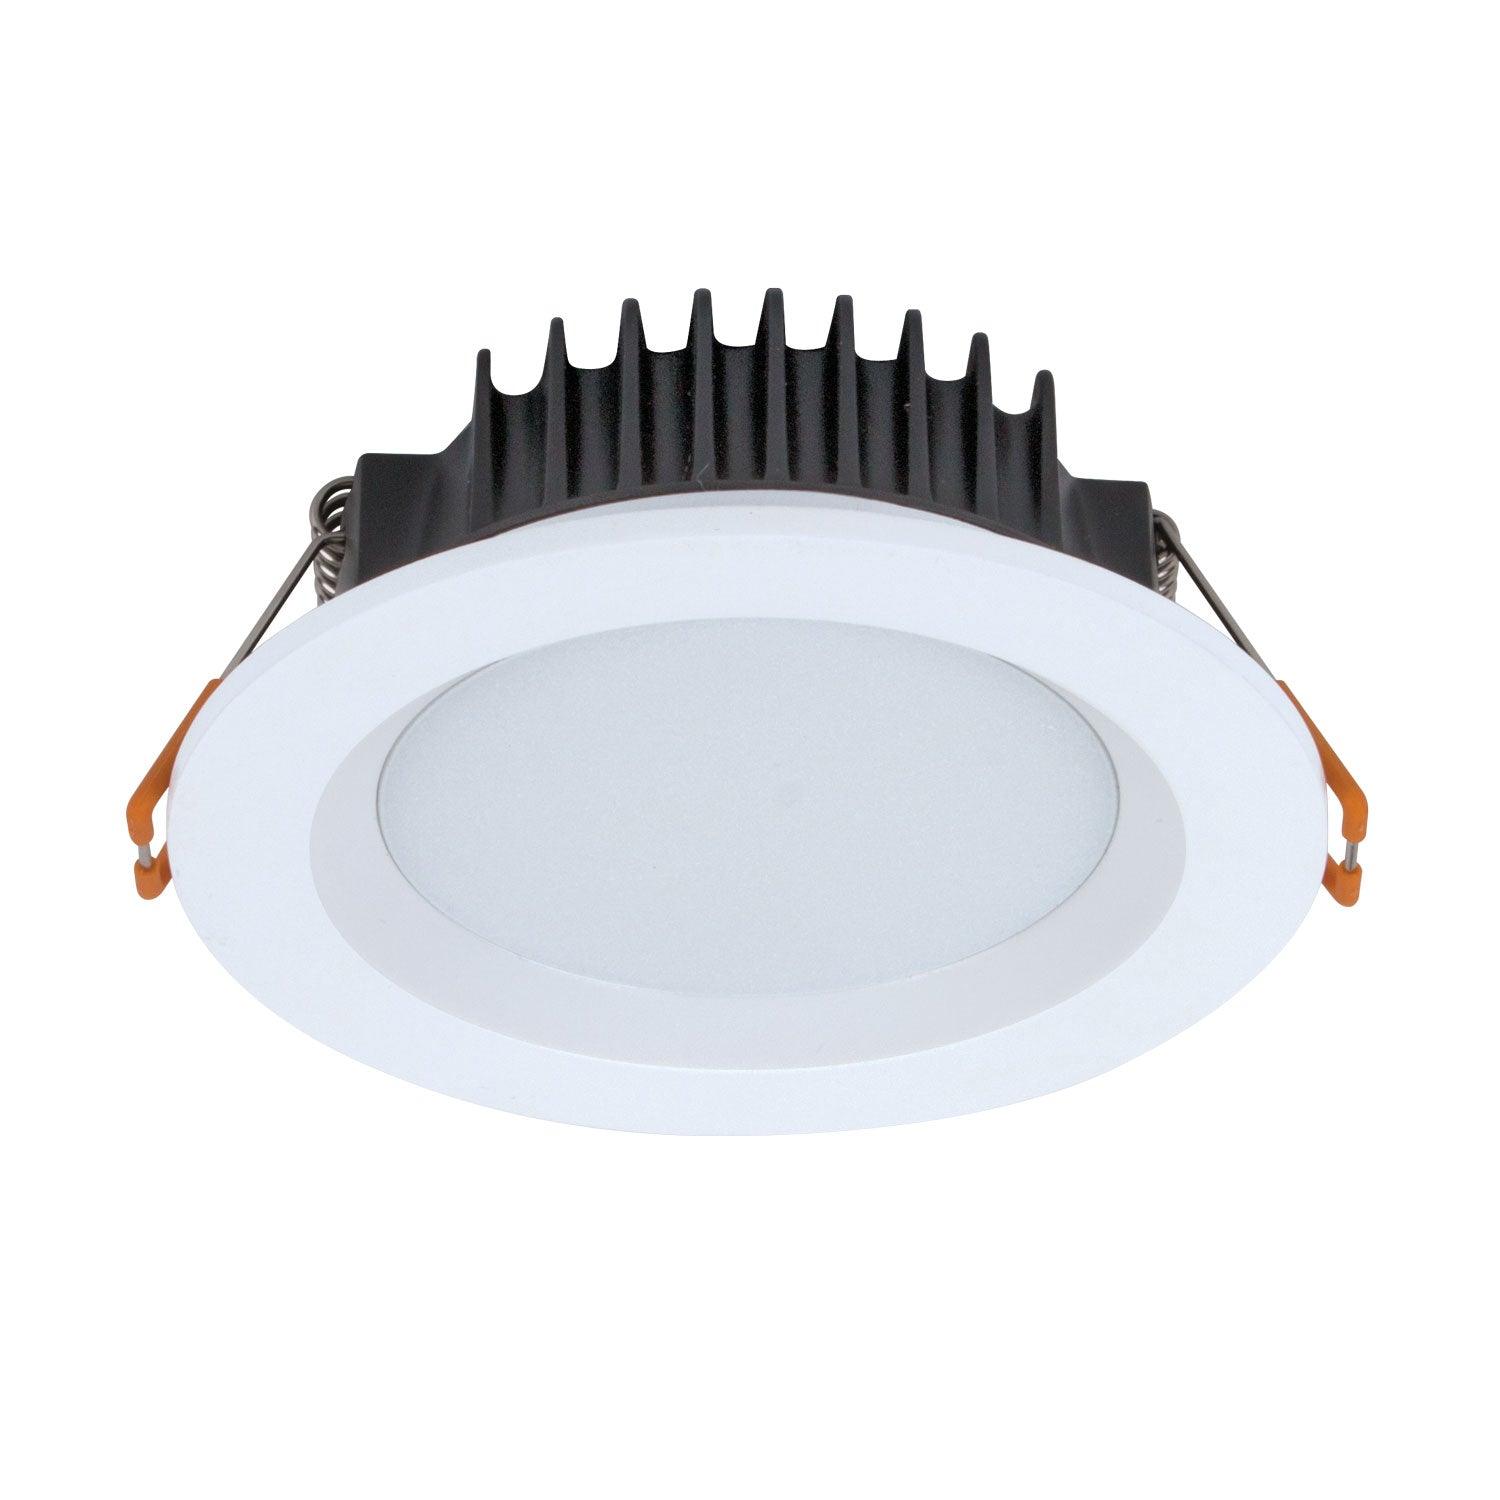 Domus Lighting LED Downlights WHITE Boost-10 - 10W Colour Switchable Led Downlight Ip54 240V - Trio Lights-For-You 20726